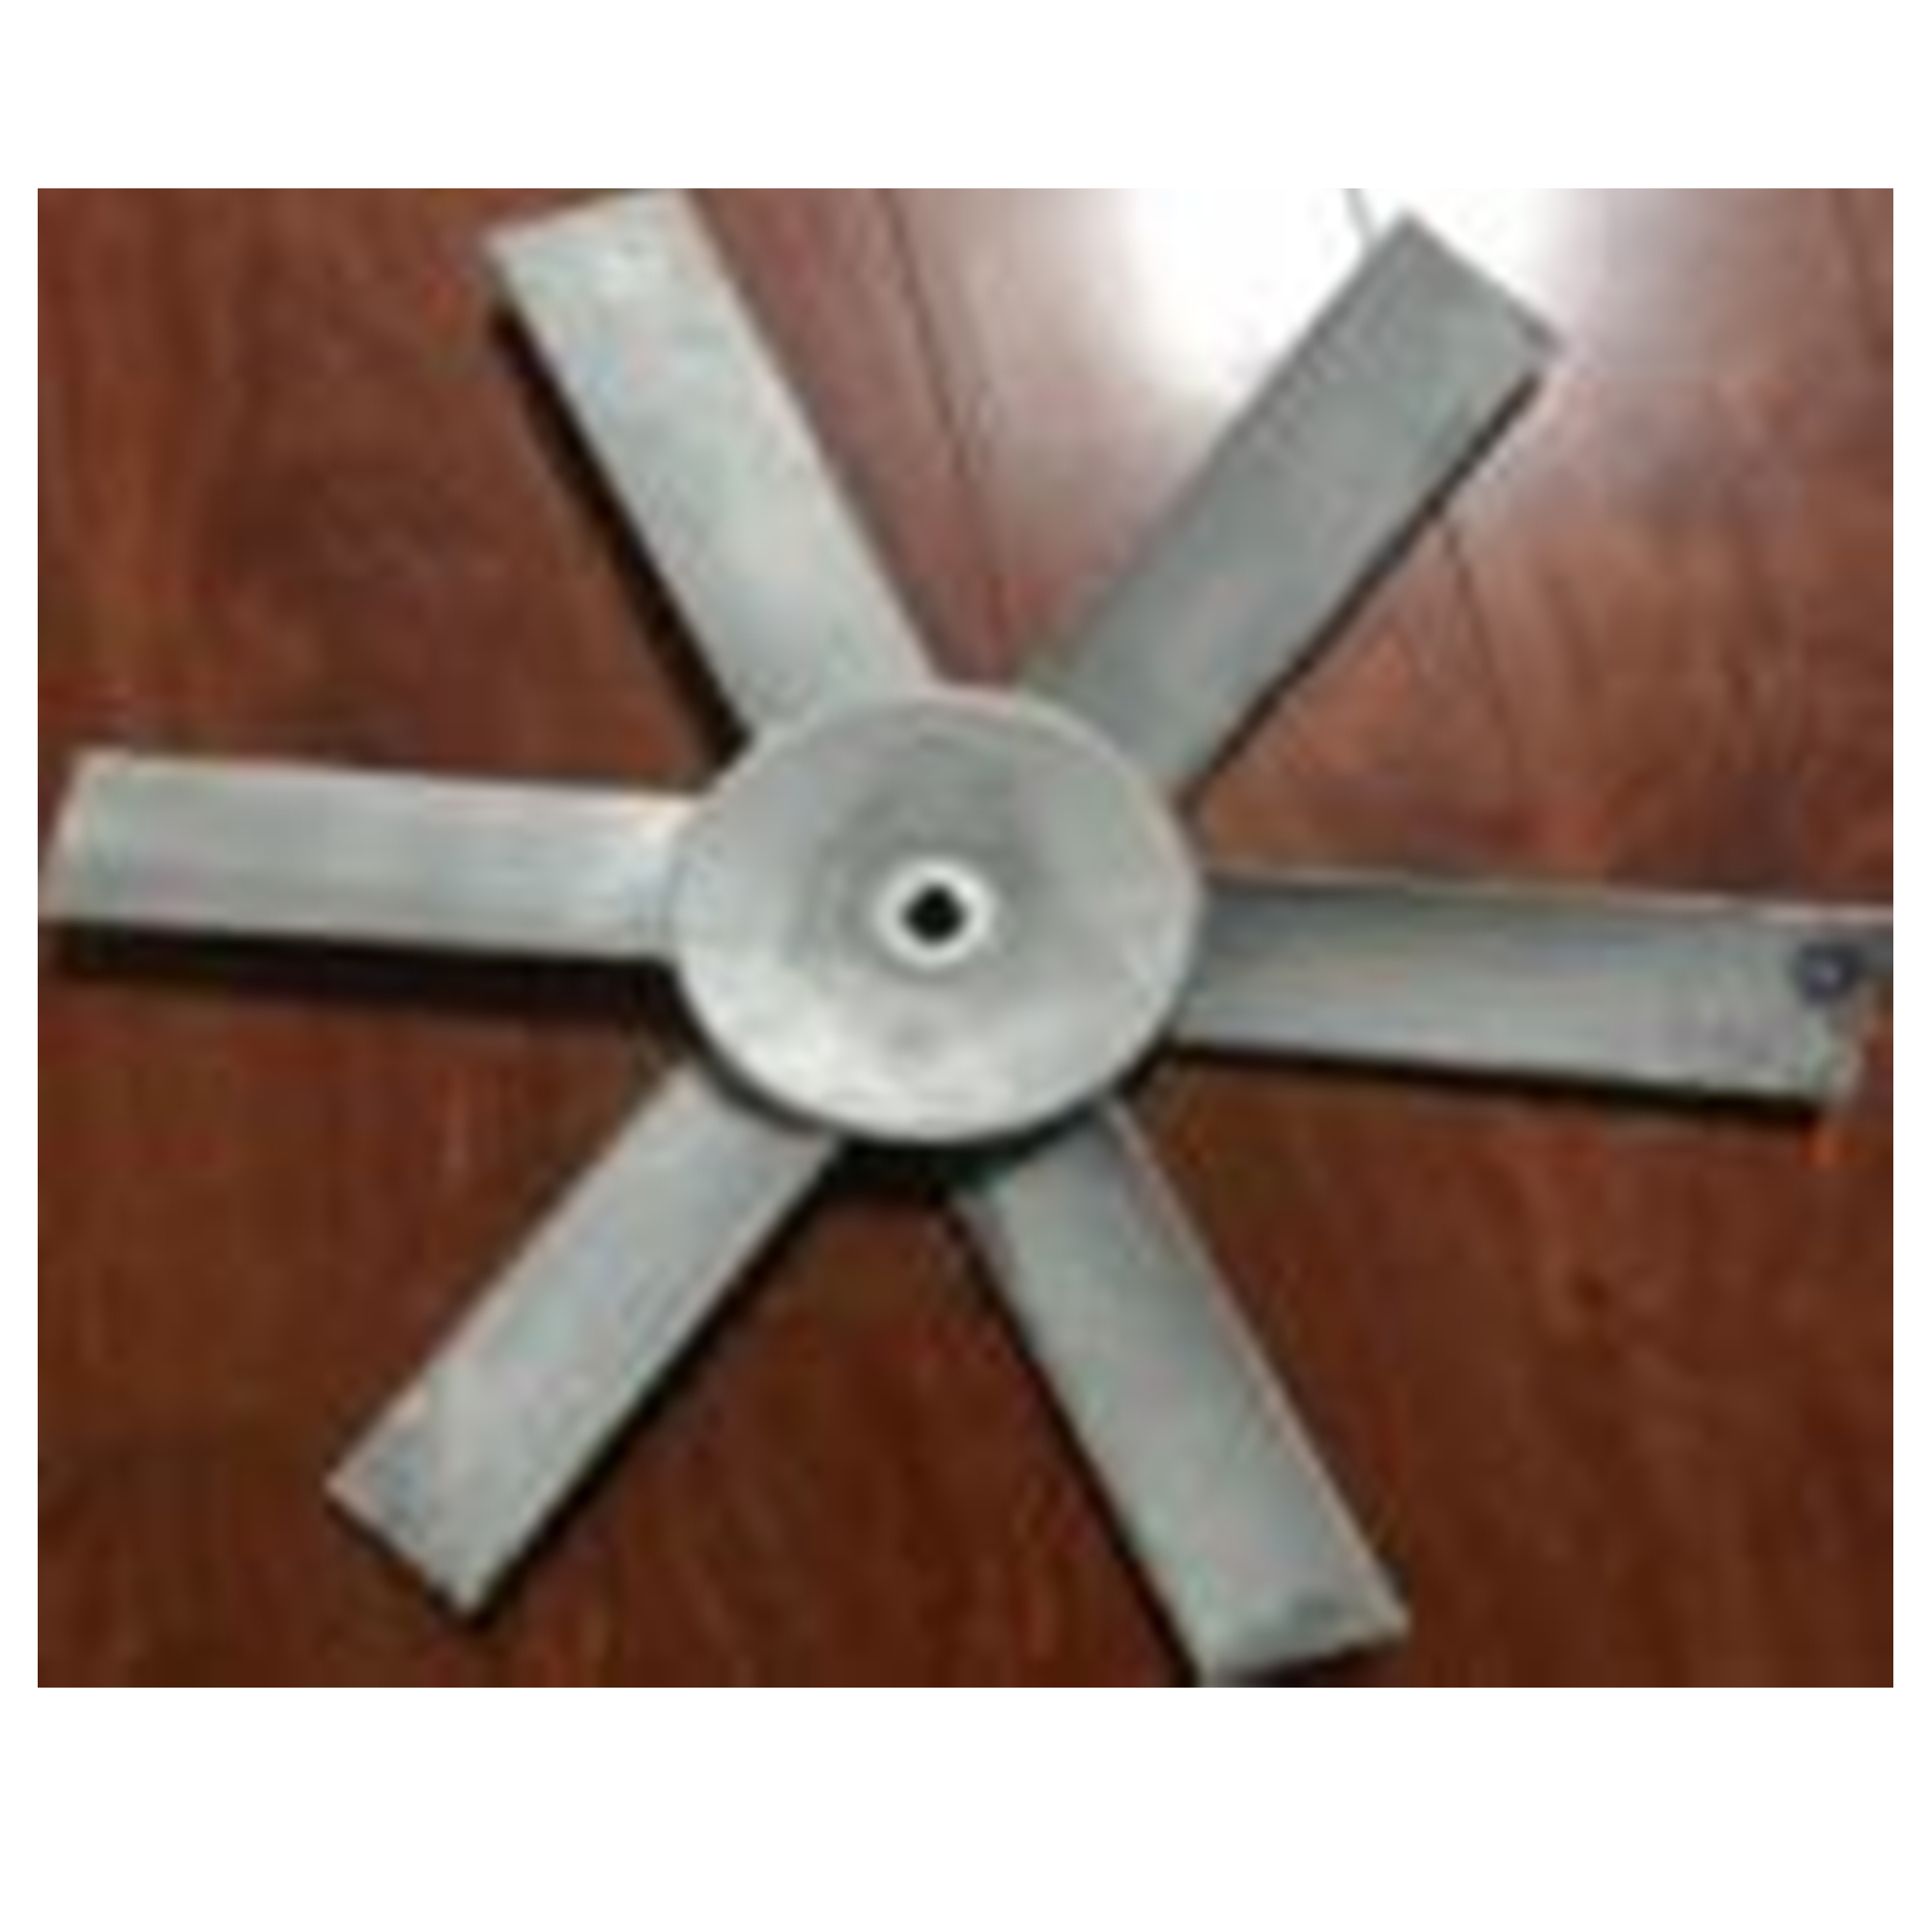 Magnesium Alloy Axial Fan Impeller mbali zowomba mbali